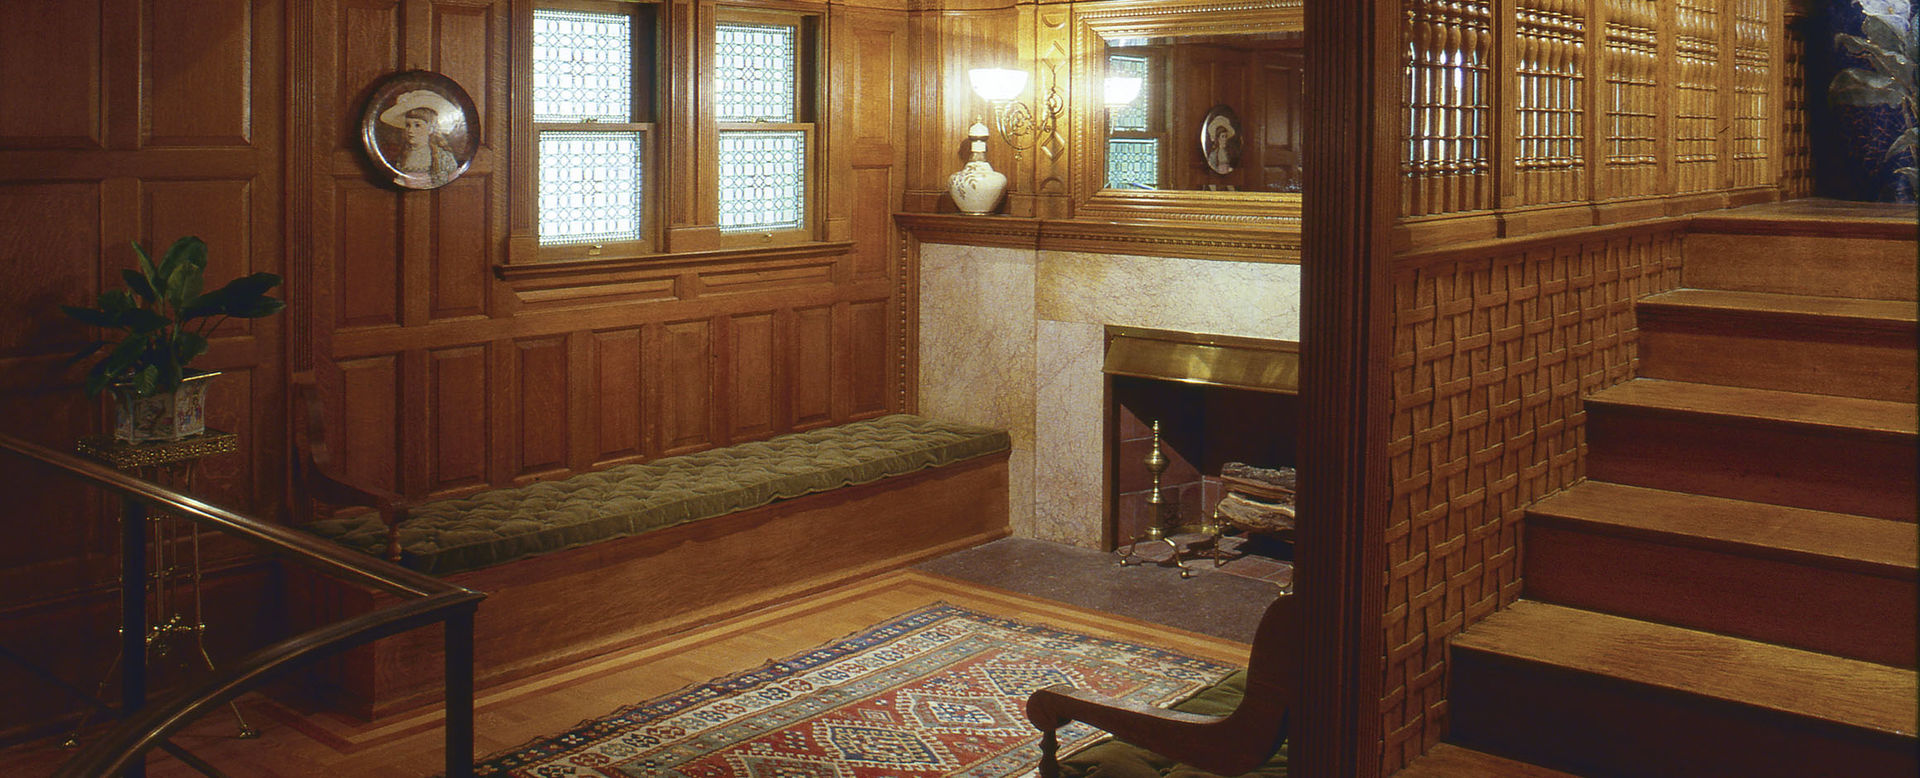 Photograph of the McKim, Mead and White Period Room with Metcalfe Stair Hall